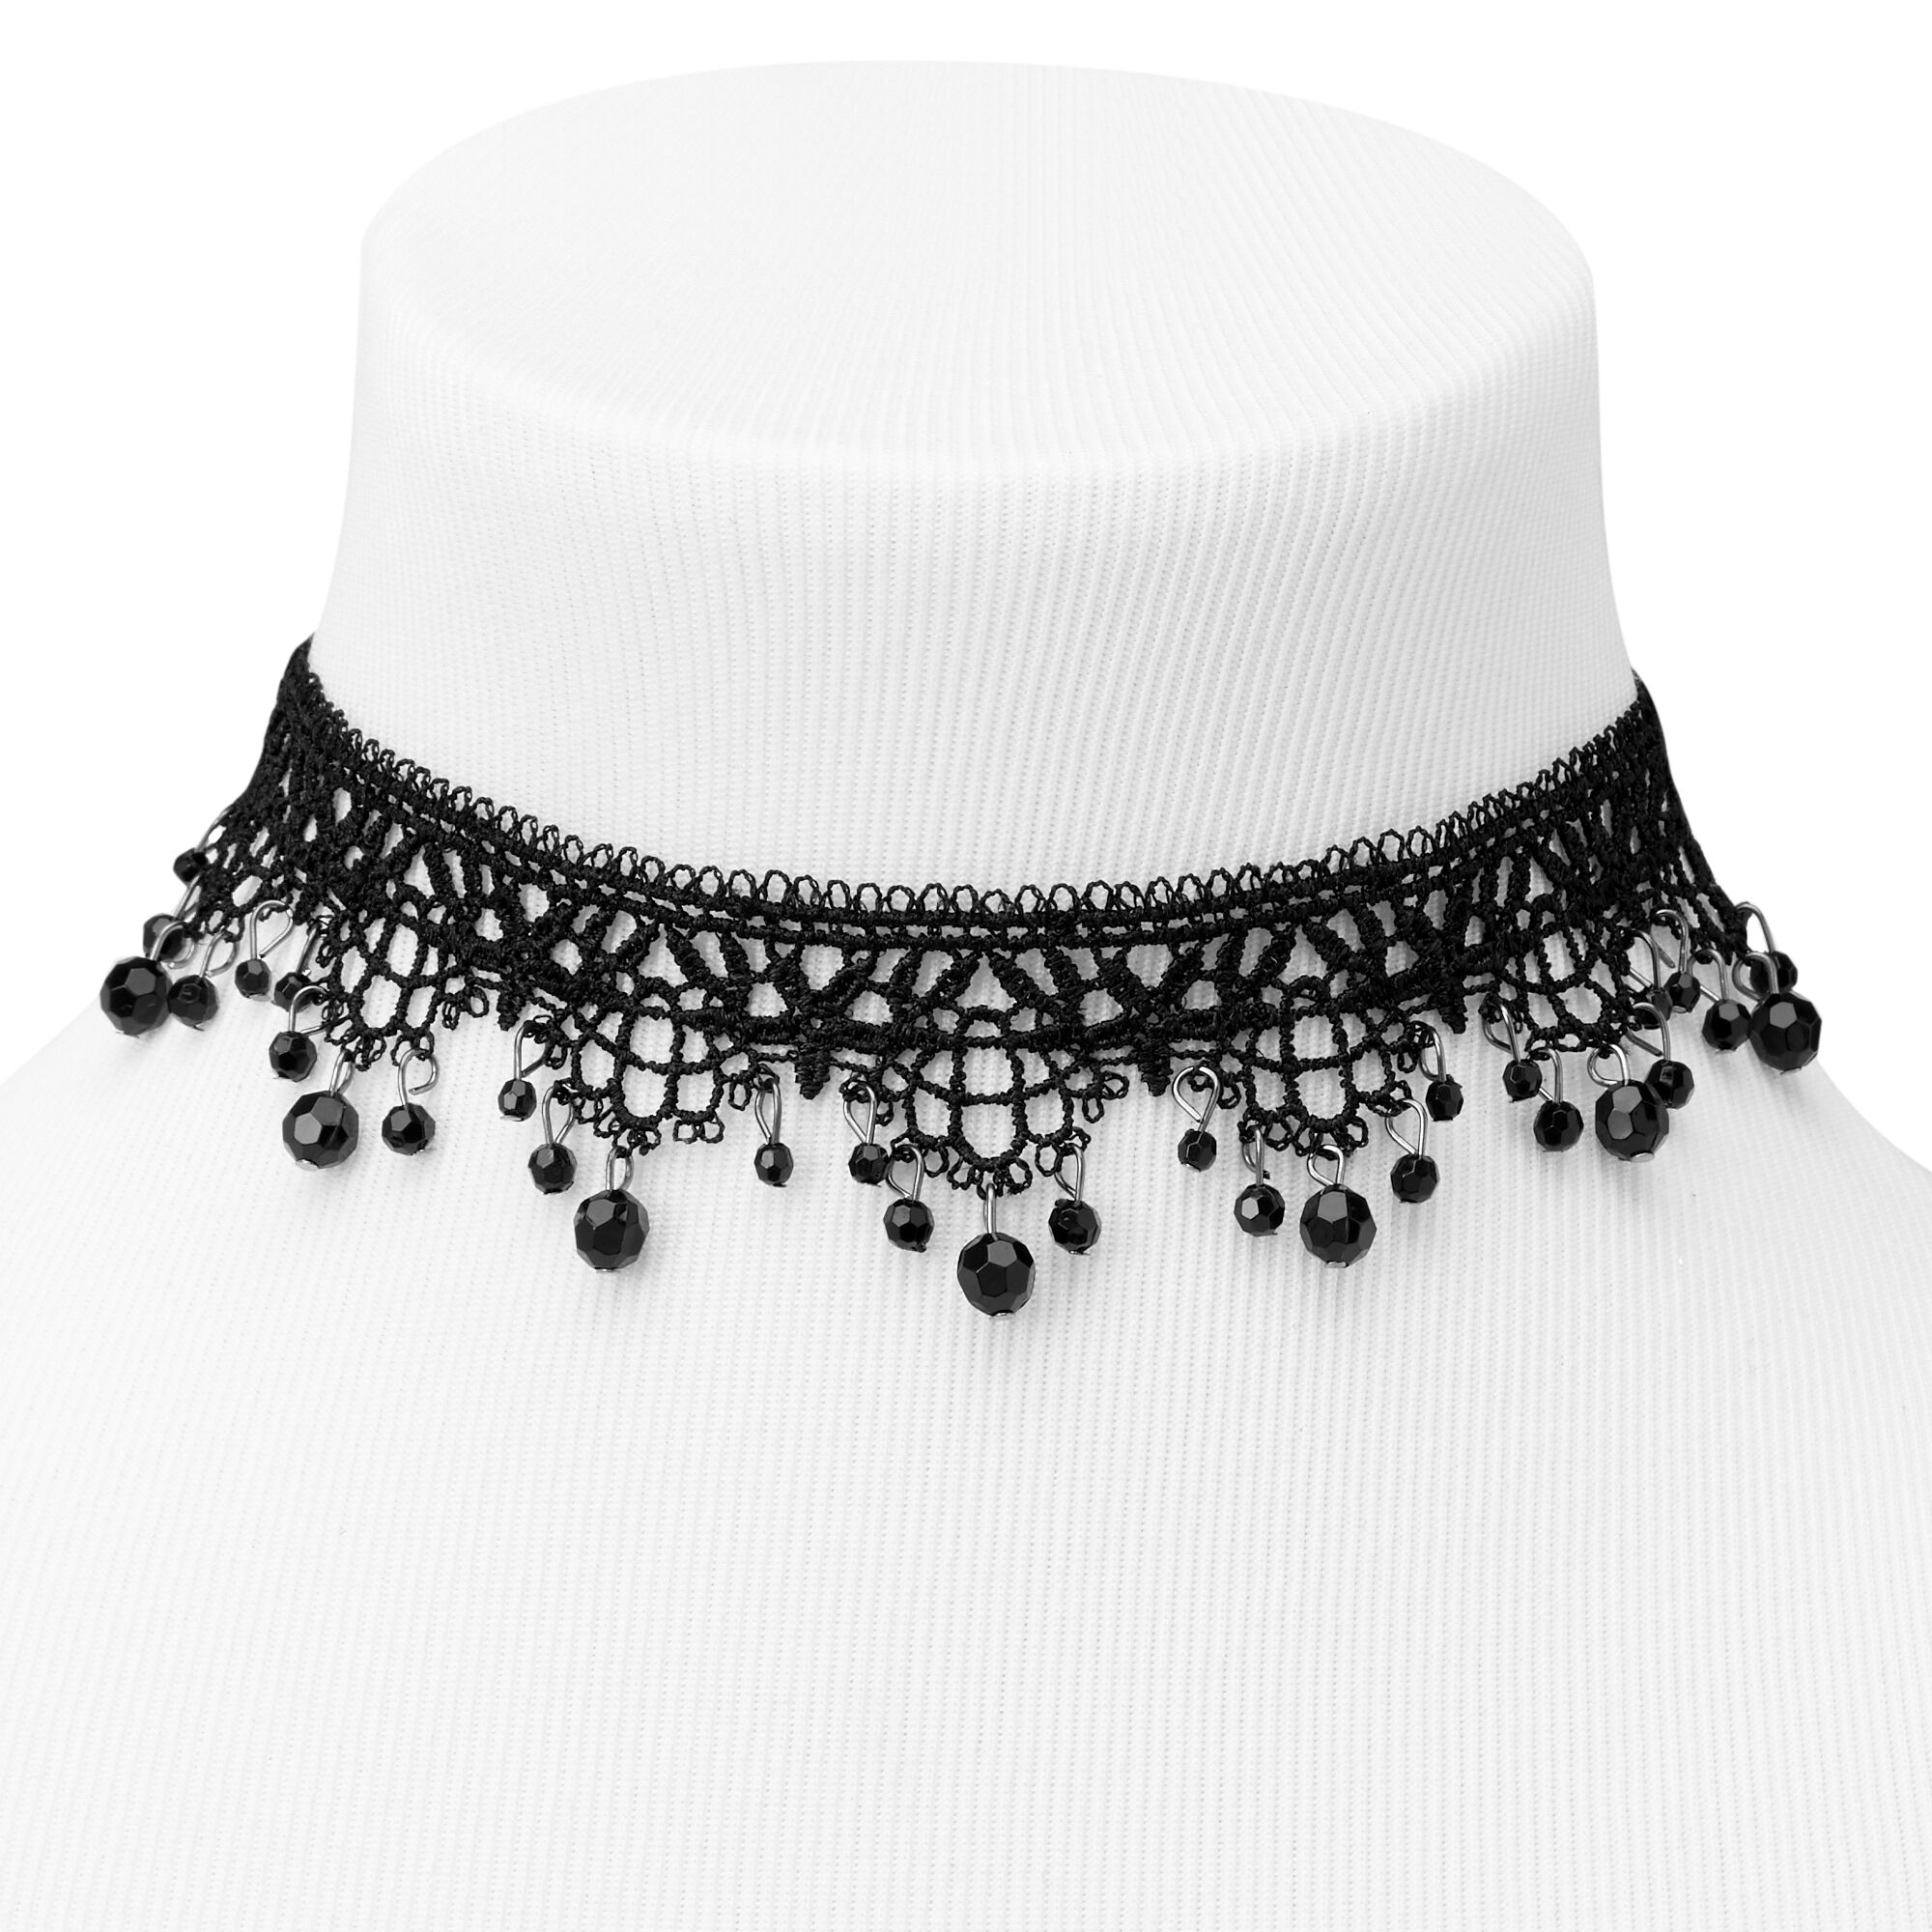 View Claires Beaded Lace Ornate Choker Necklace Black information